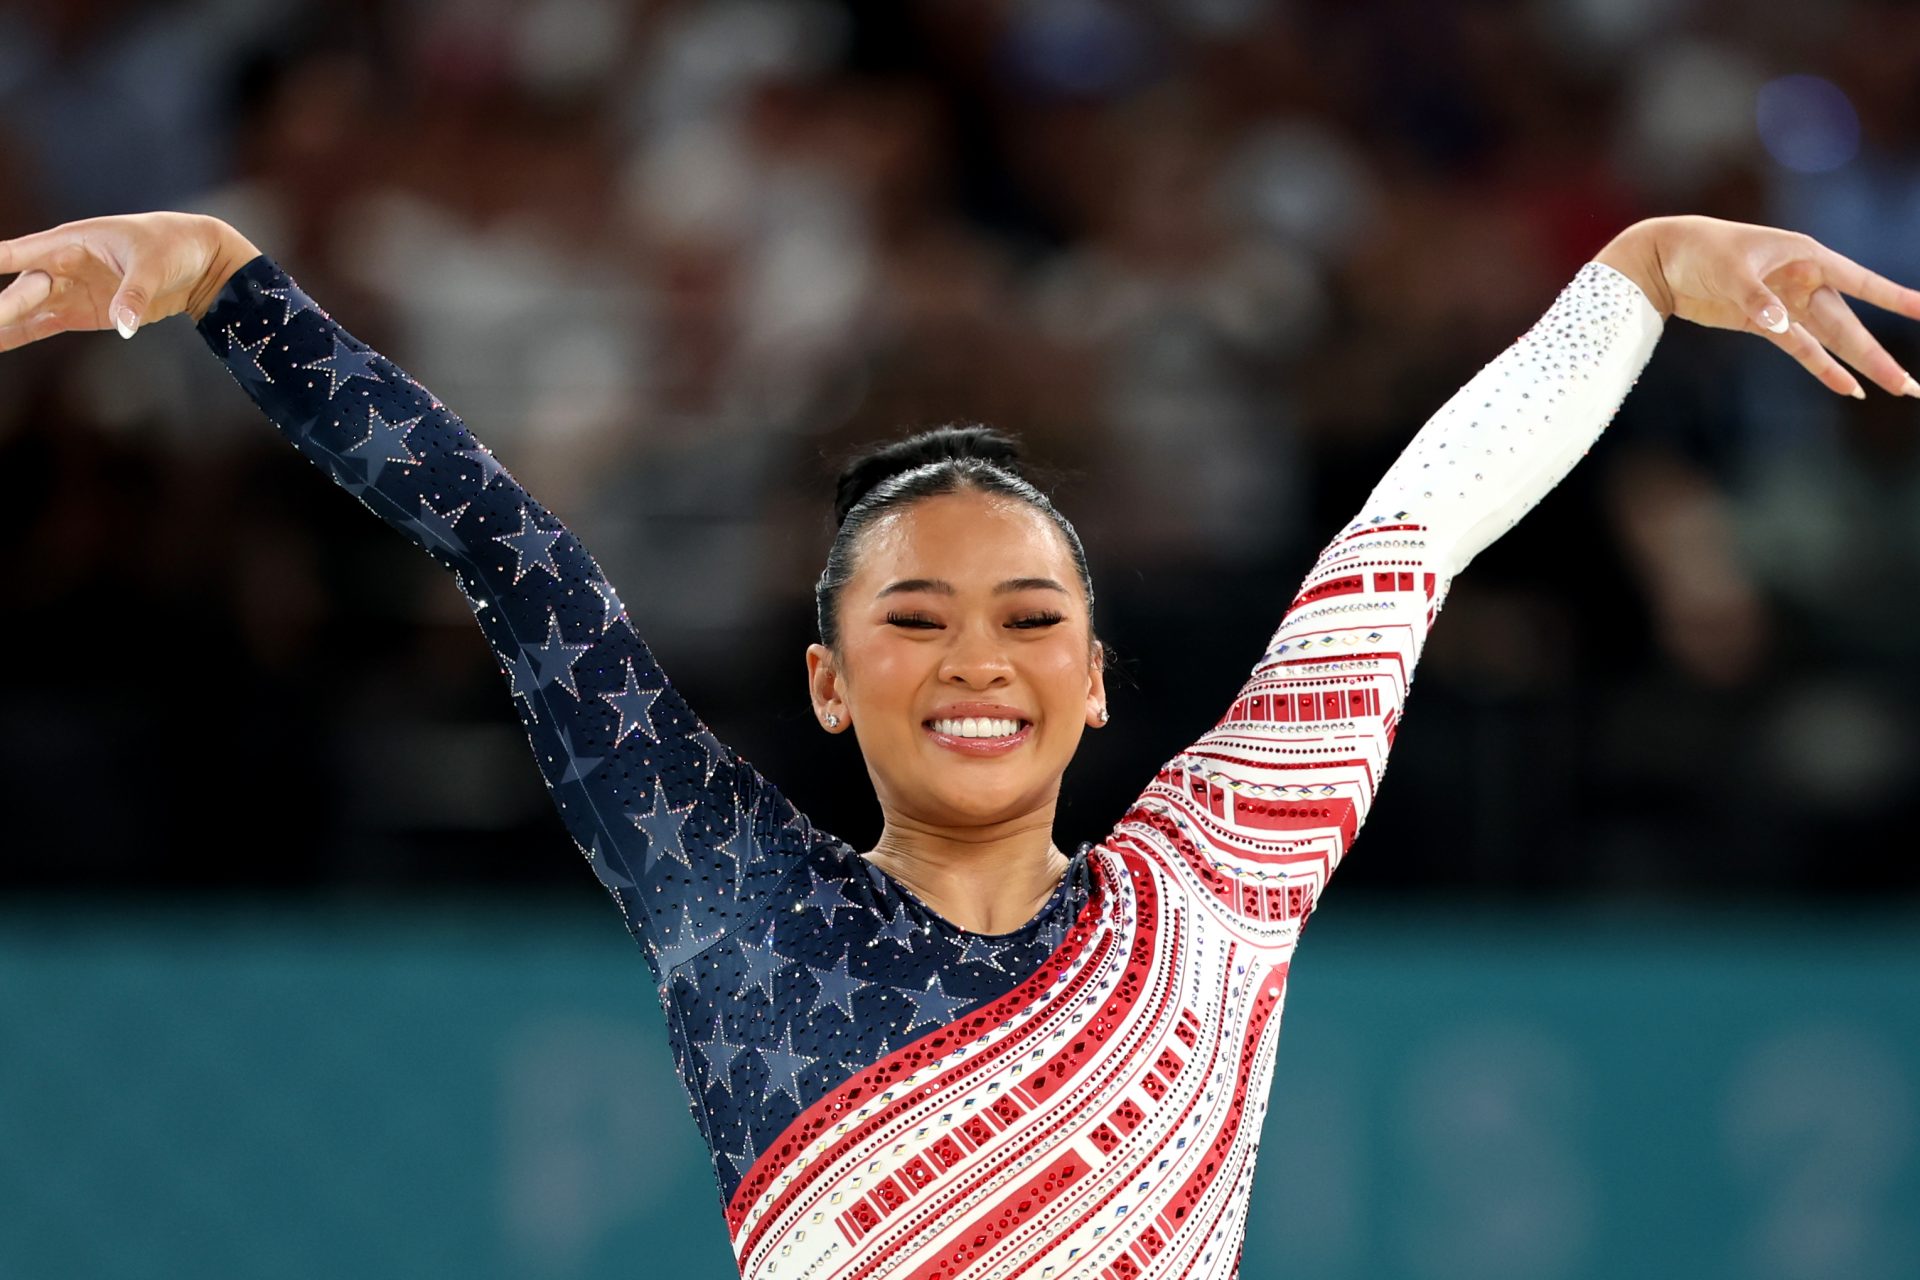 Suni Lee: The Olympic gold medal gymnast with incurable kidney disease